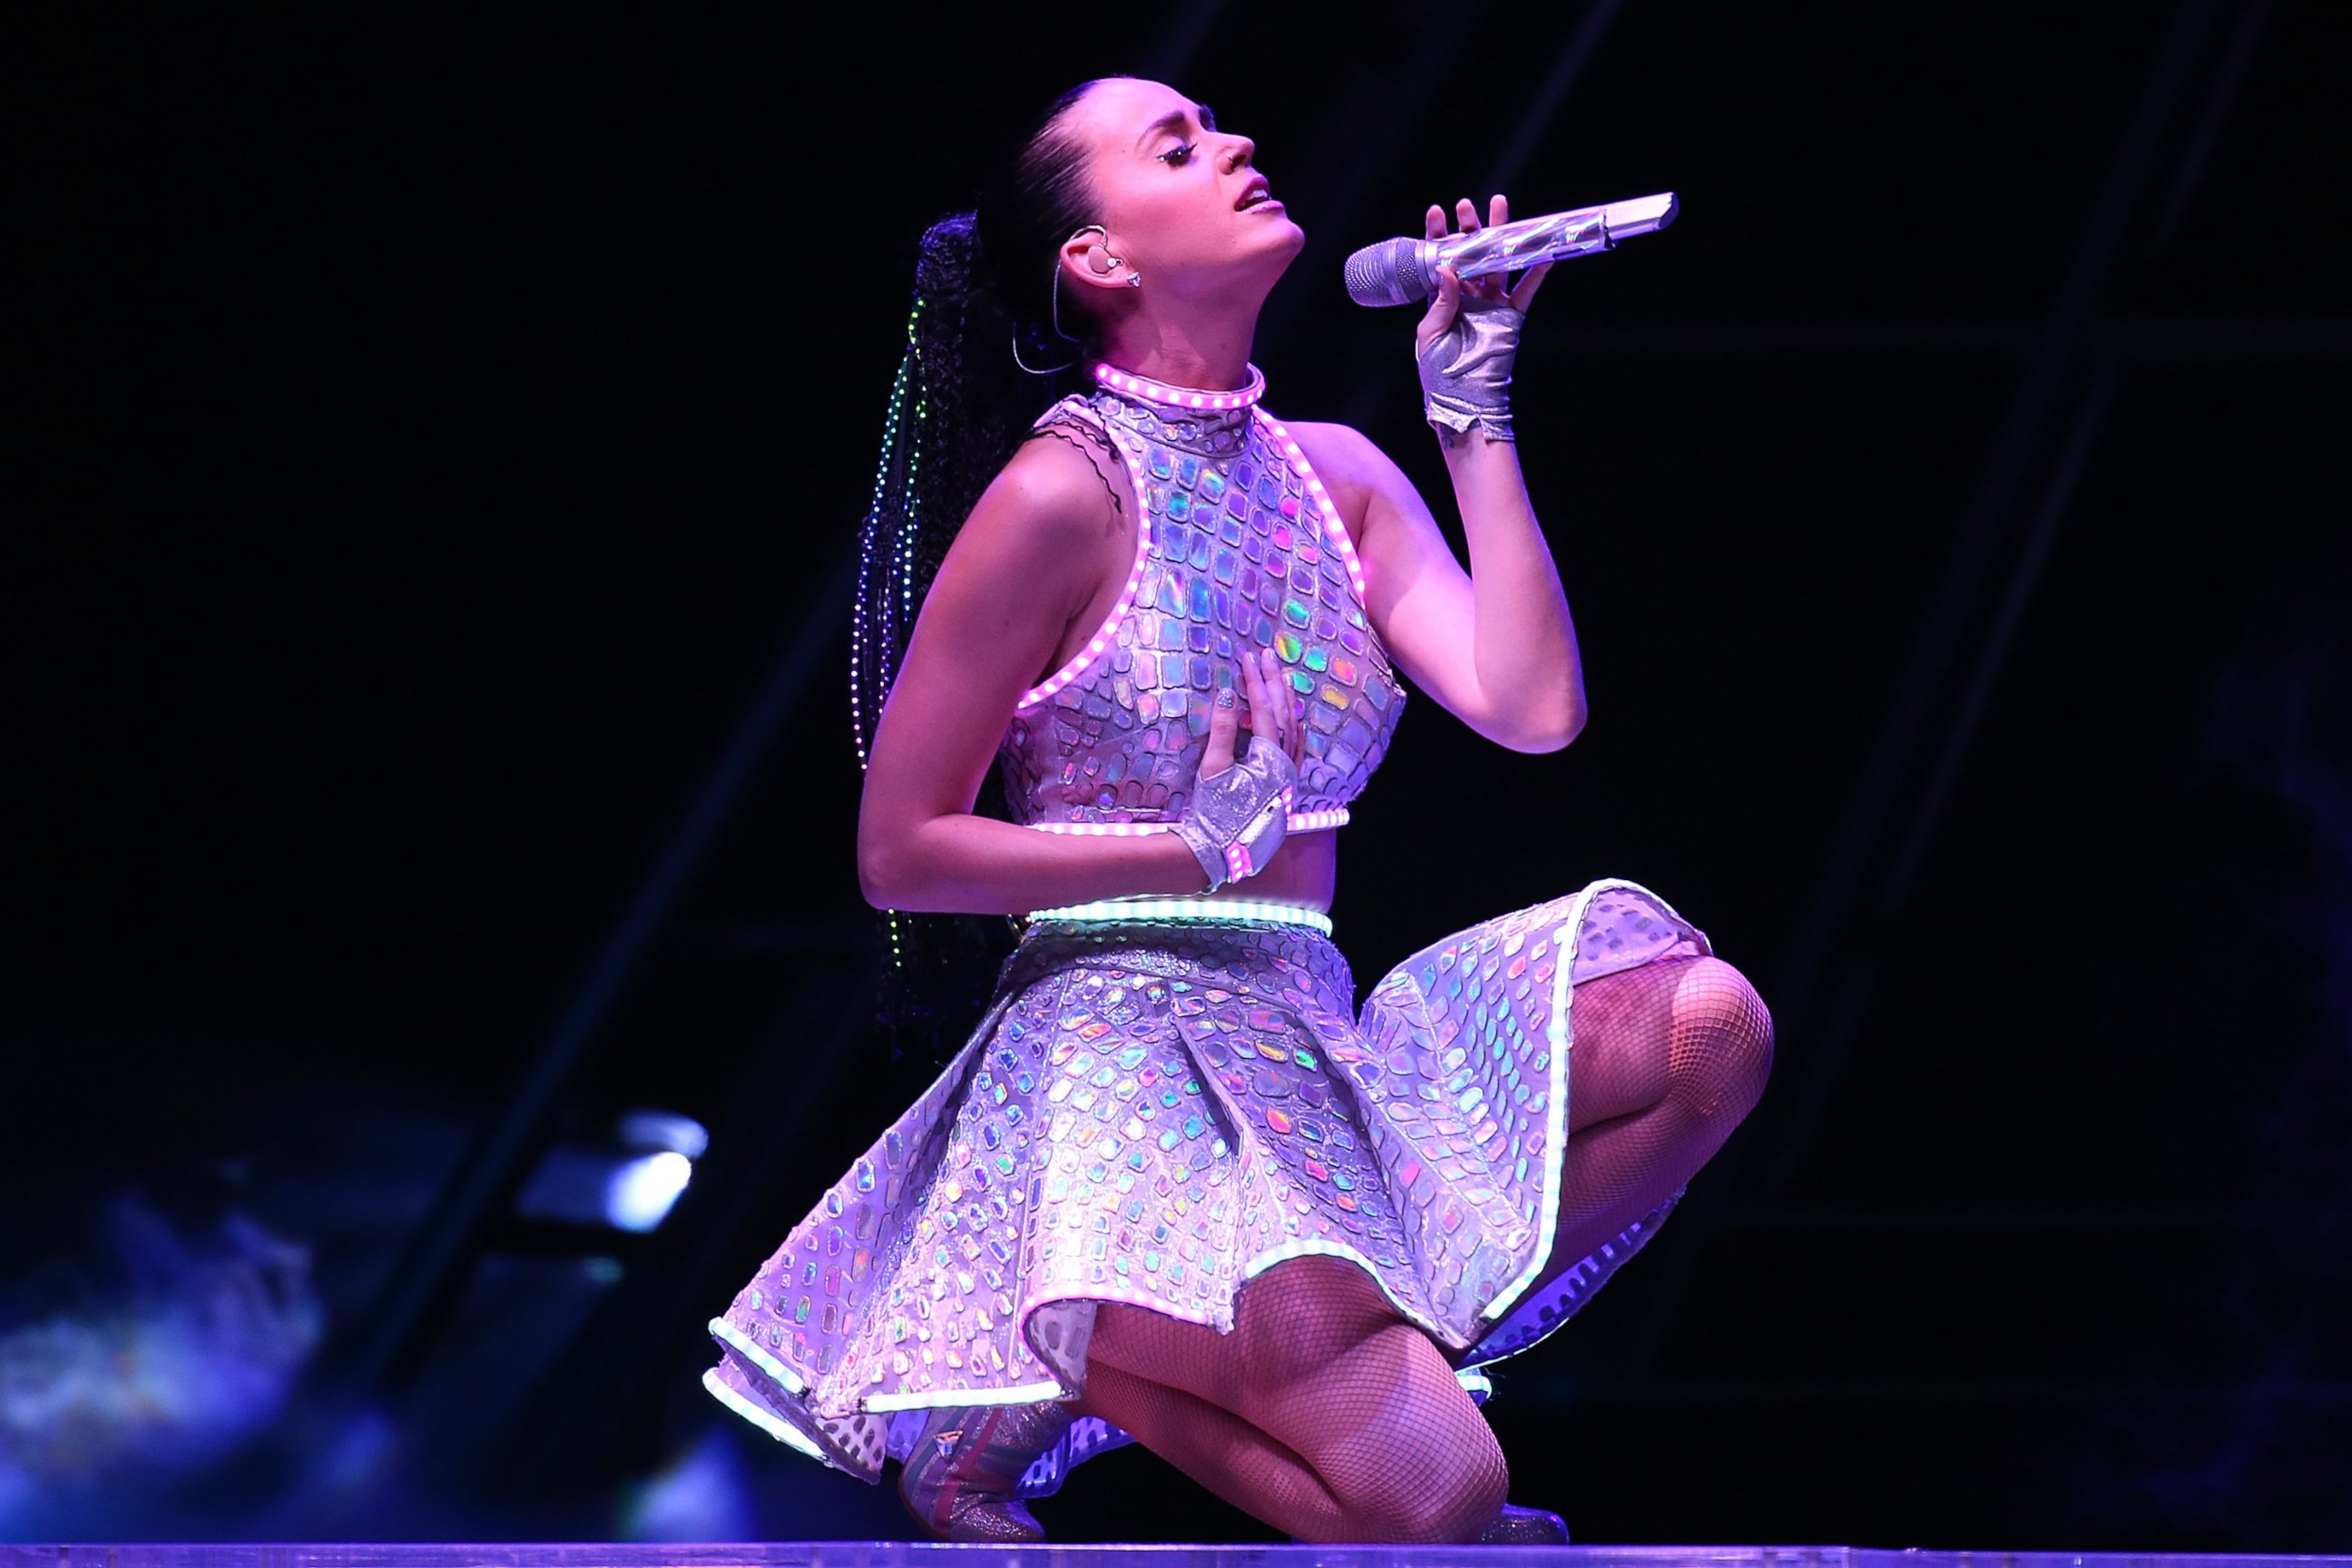 PHOTO: Katy Perry performs live at Perth Arena during her Prismatic World Tour on Nov. 7, 2014 in Perth, Australia. 